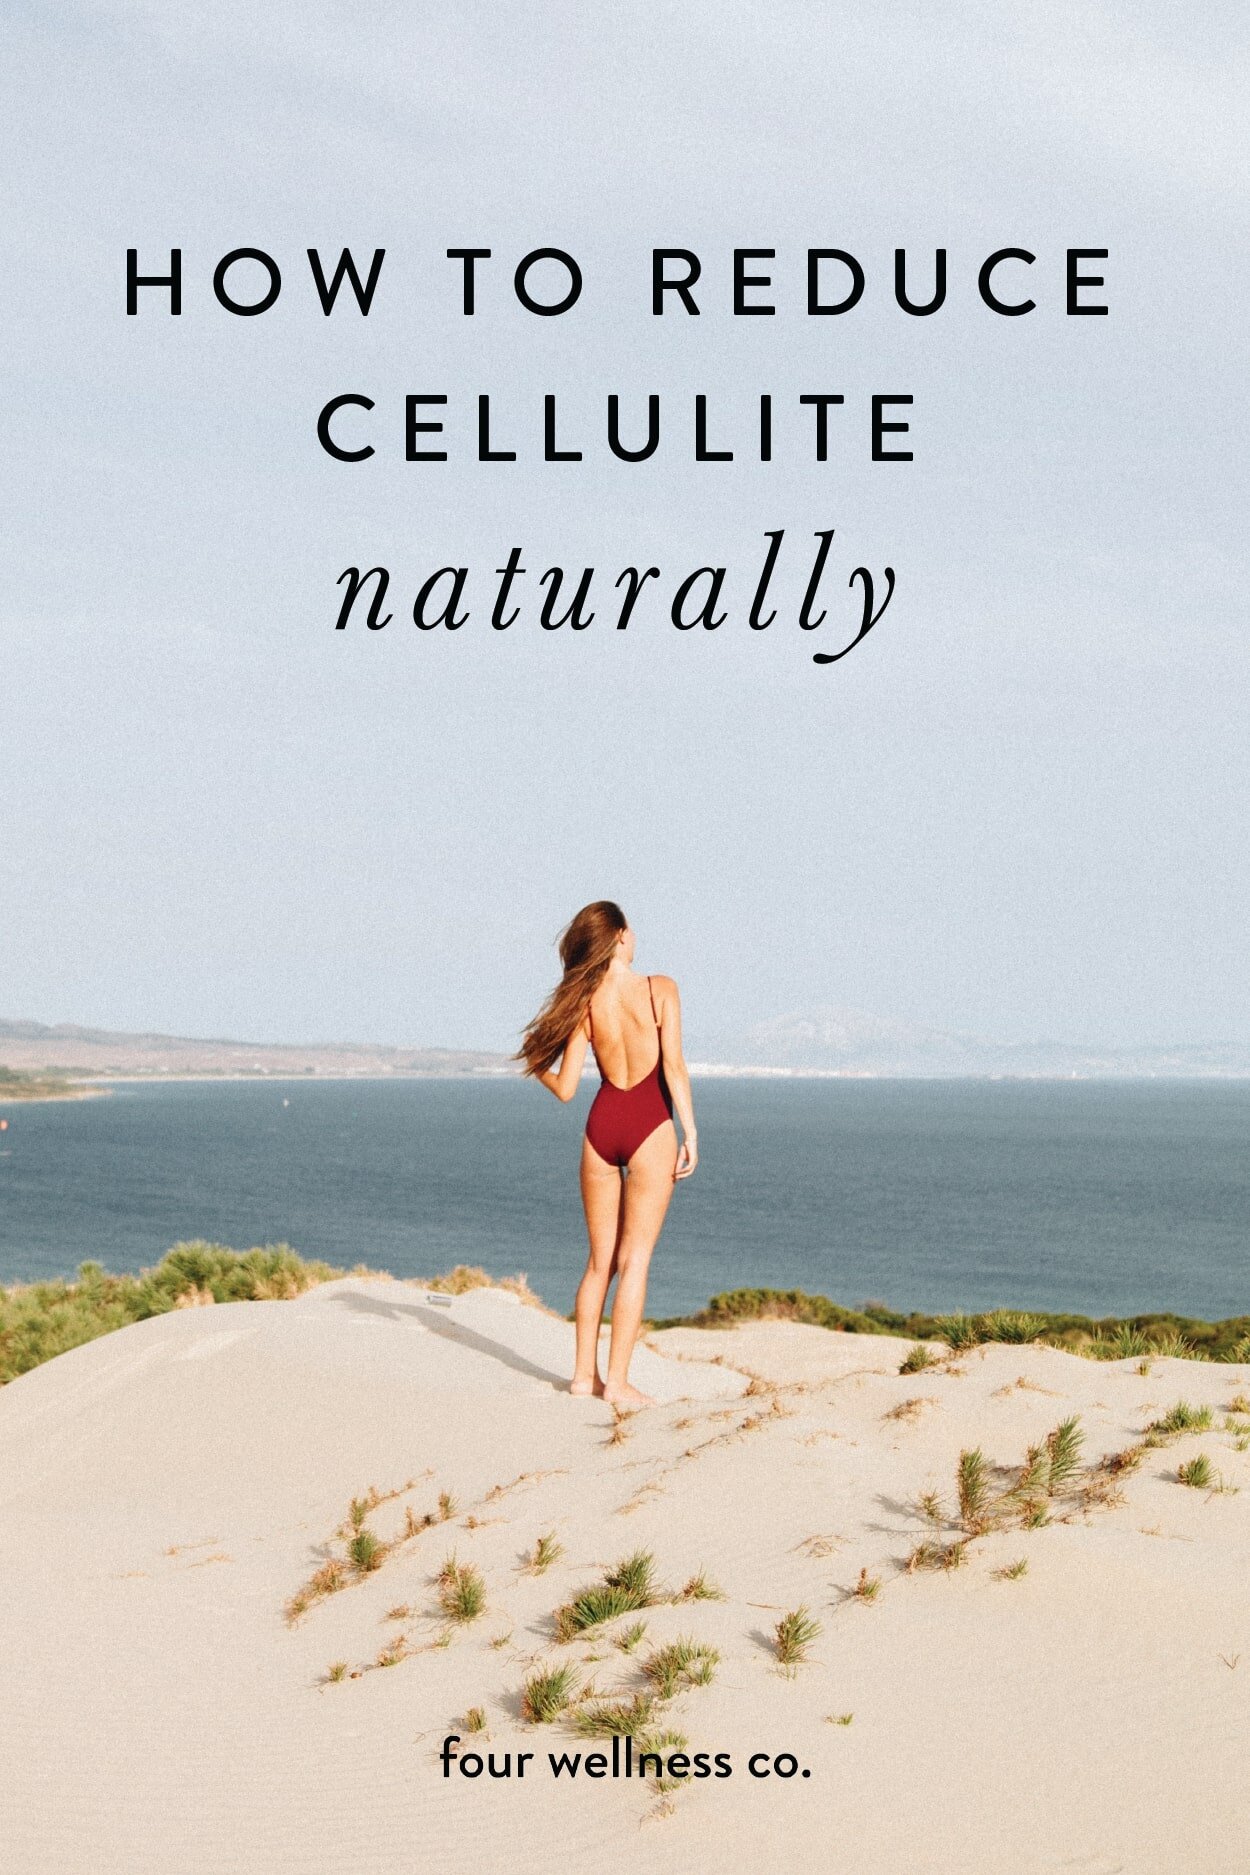 Cellulite: What It Is, Why We Get It & How to Reduce It // Four